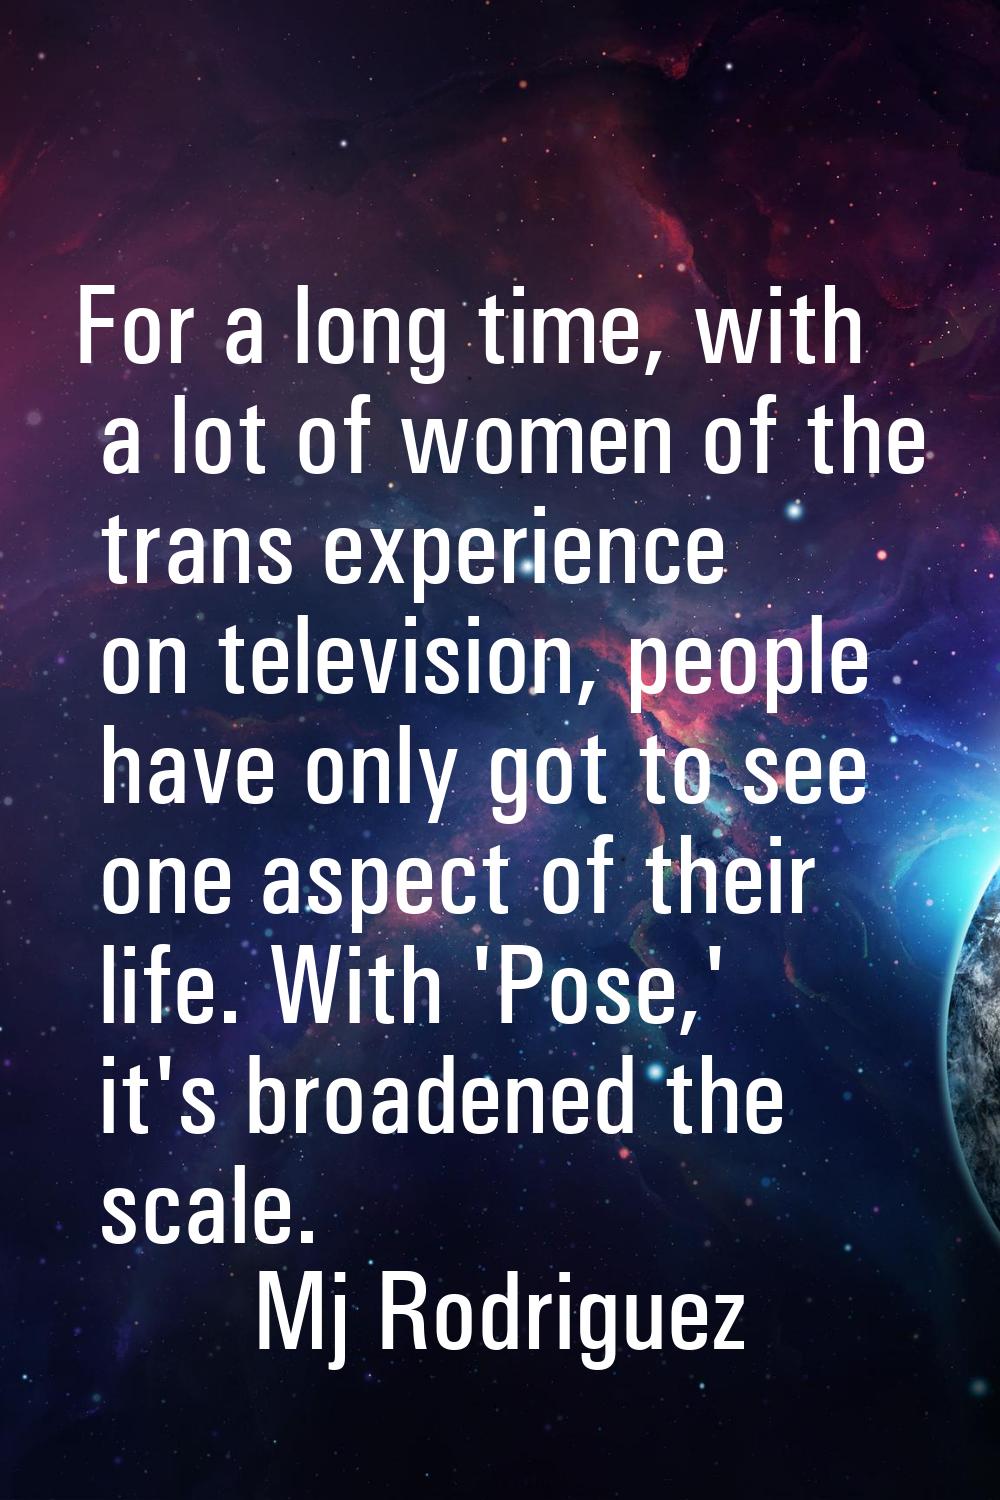 For a long time, with a lot of women of the trans experience on television, people have only got to